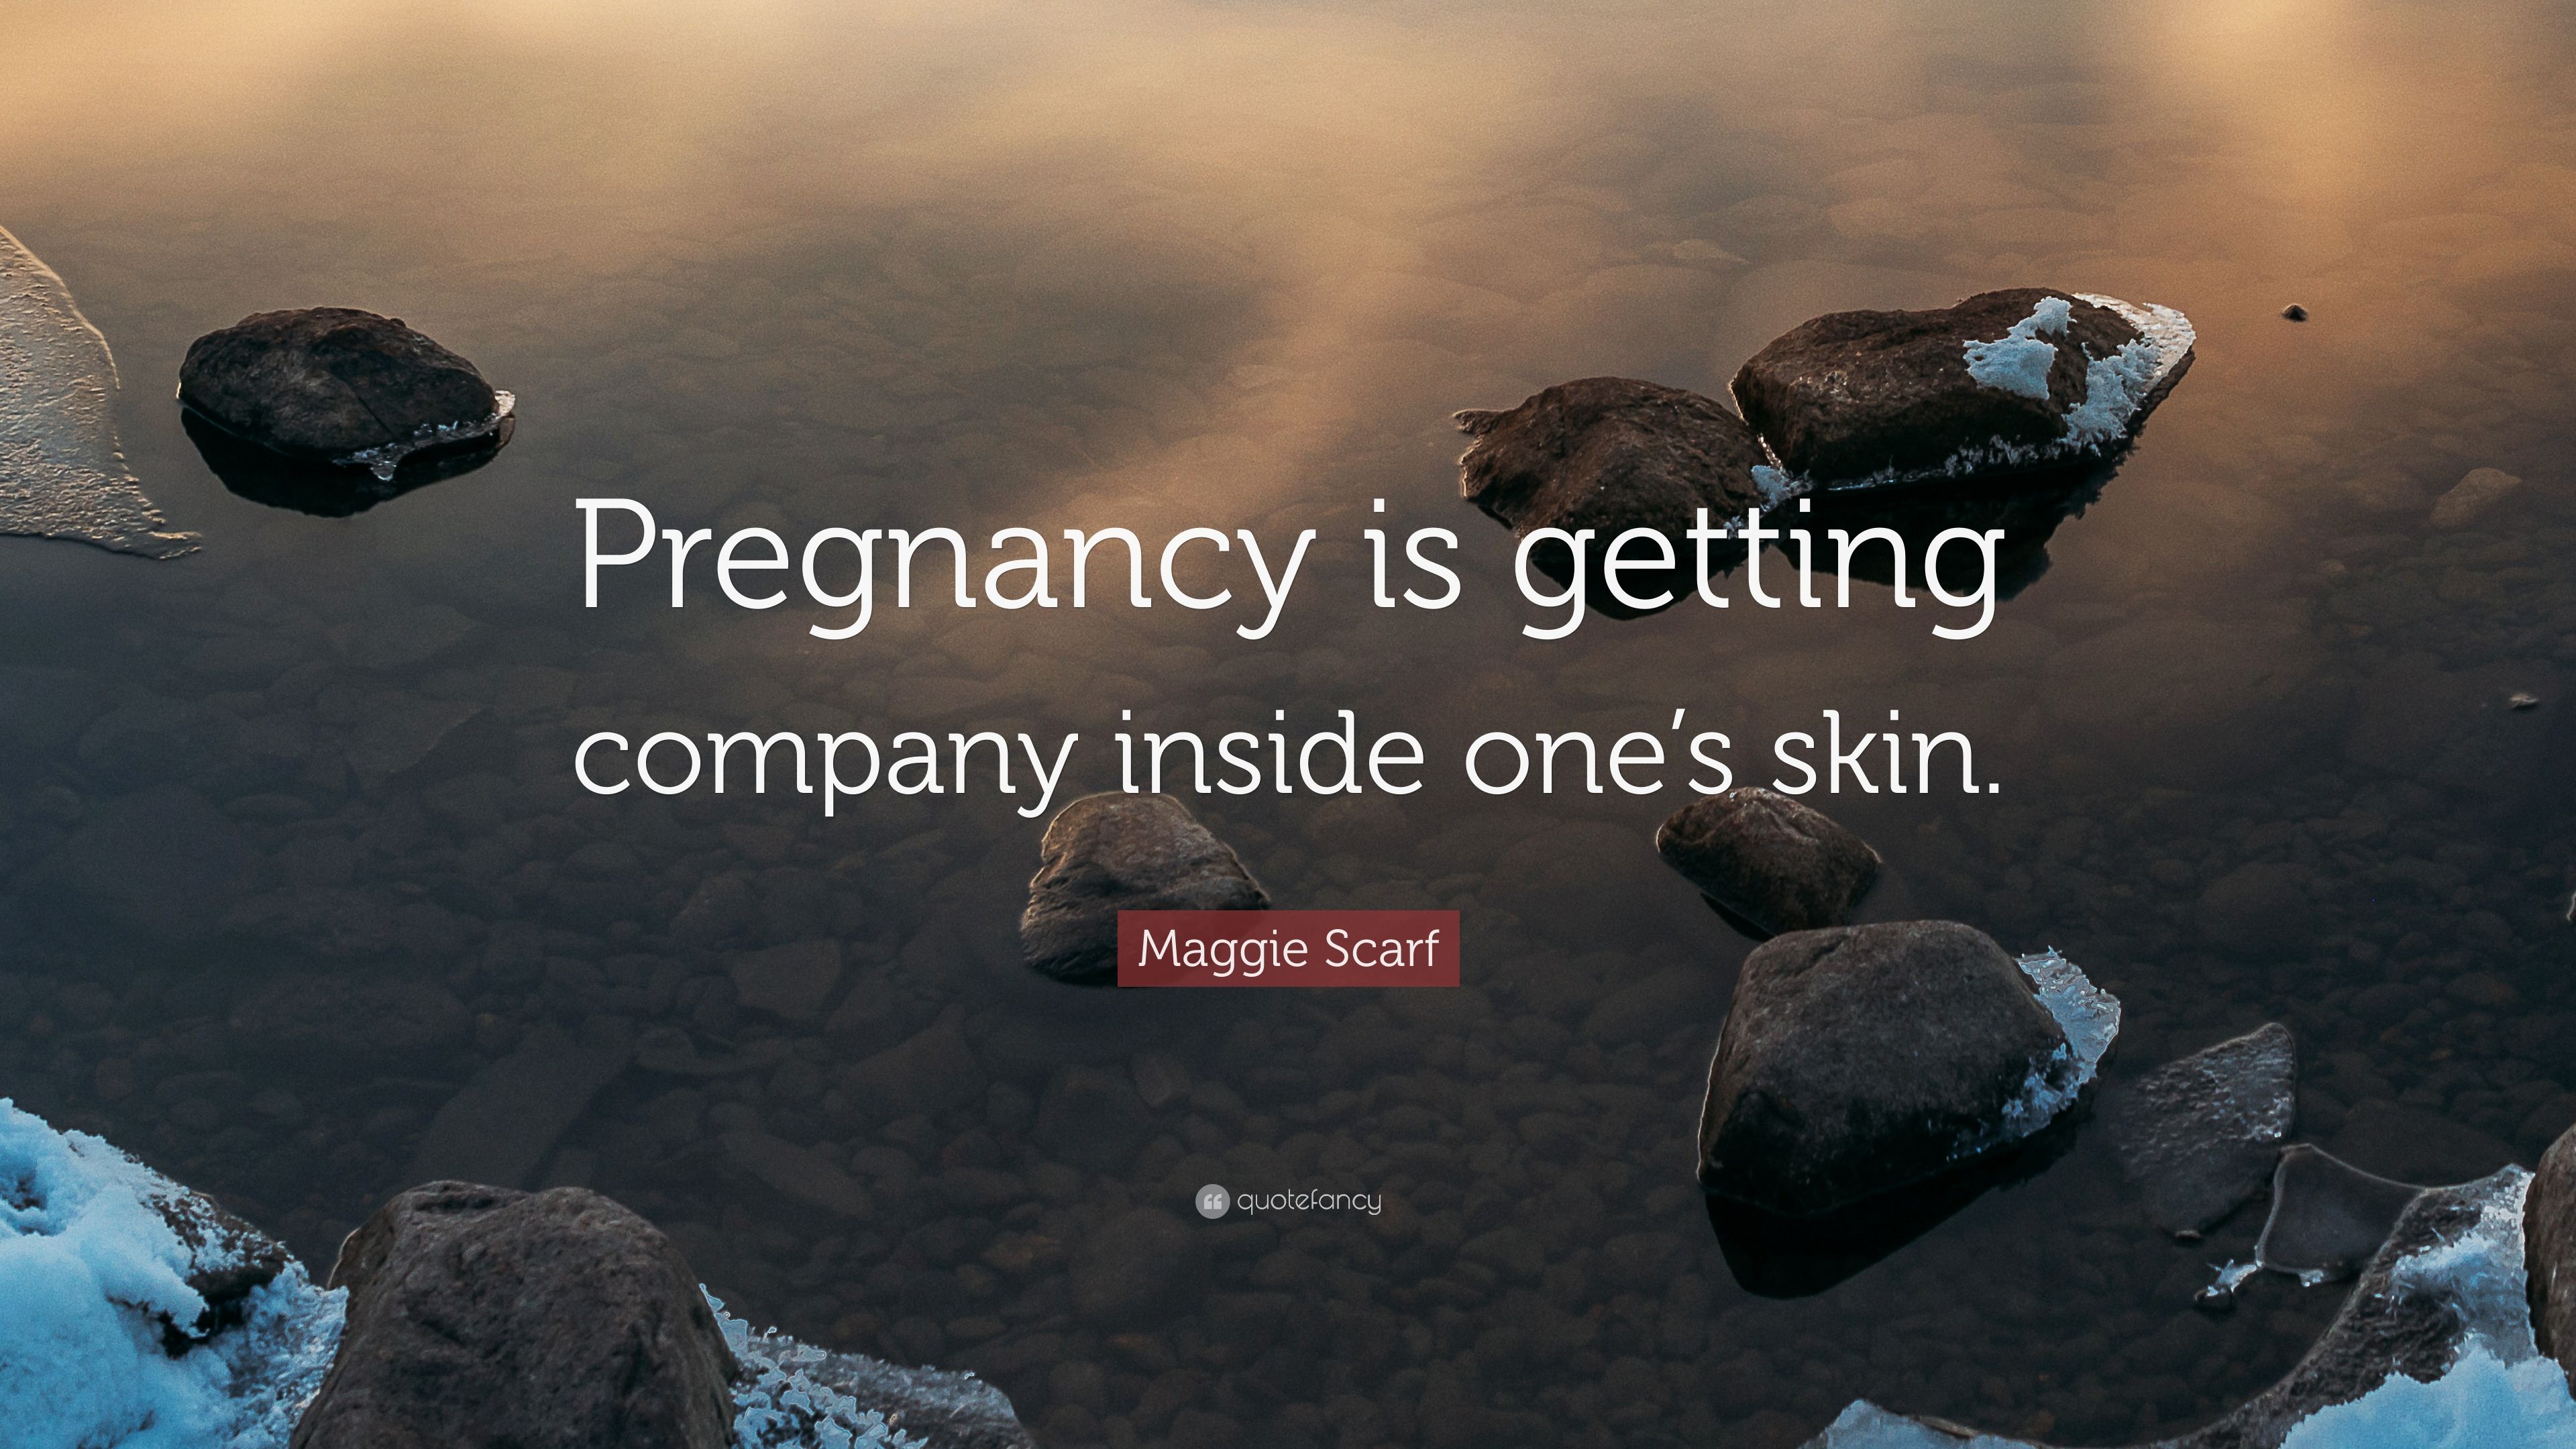 Maggie Scarf Quote: “Pregnancy is getting company inside one's